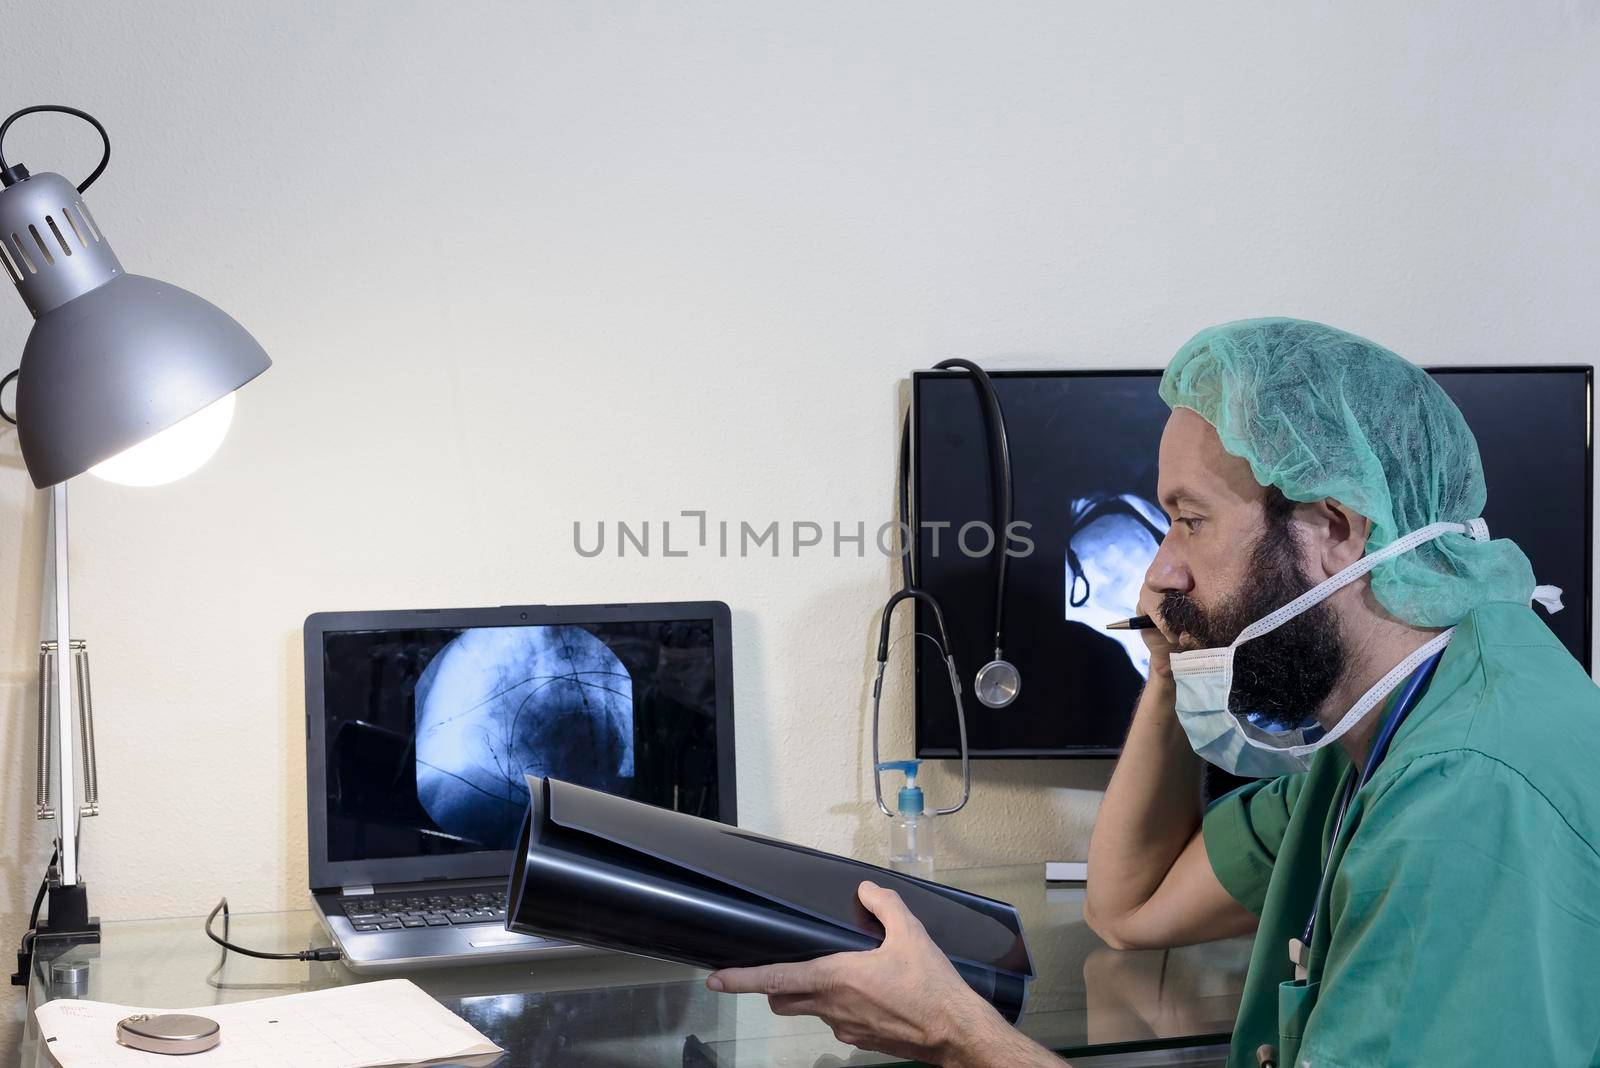 In the medical laboratory, the patient undergoes an MRI or CT scan under the supervision of a radiologist, in the control room, the doctor observes the procedure and monitors the scan results